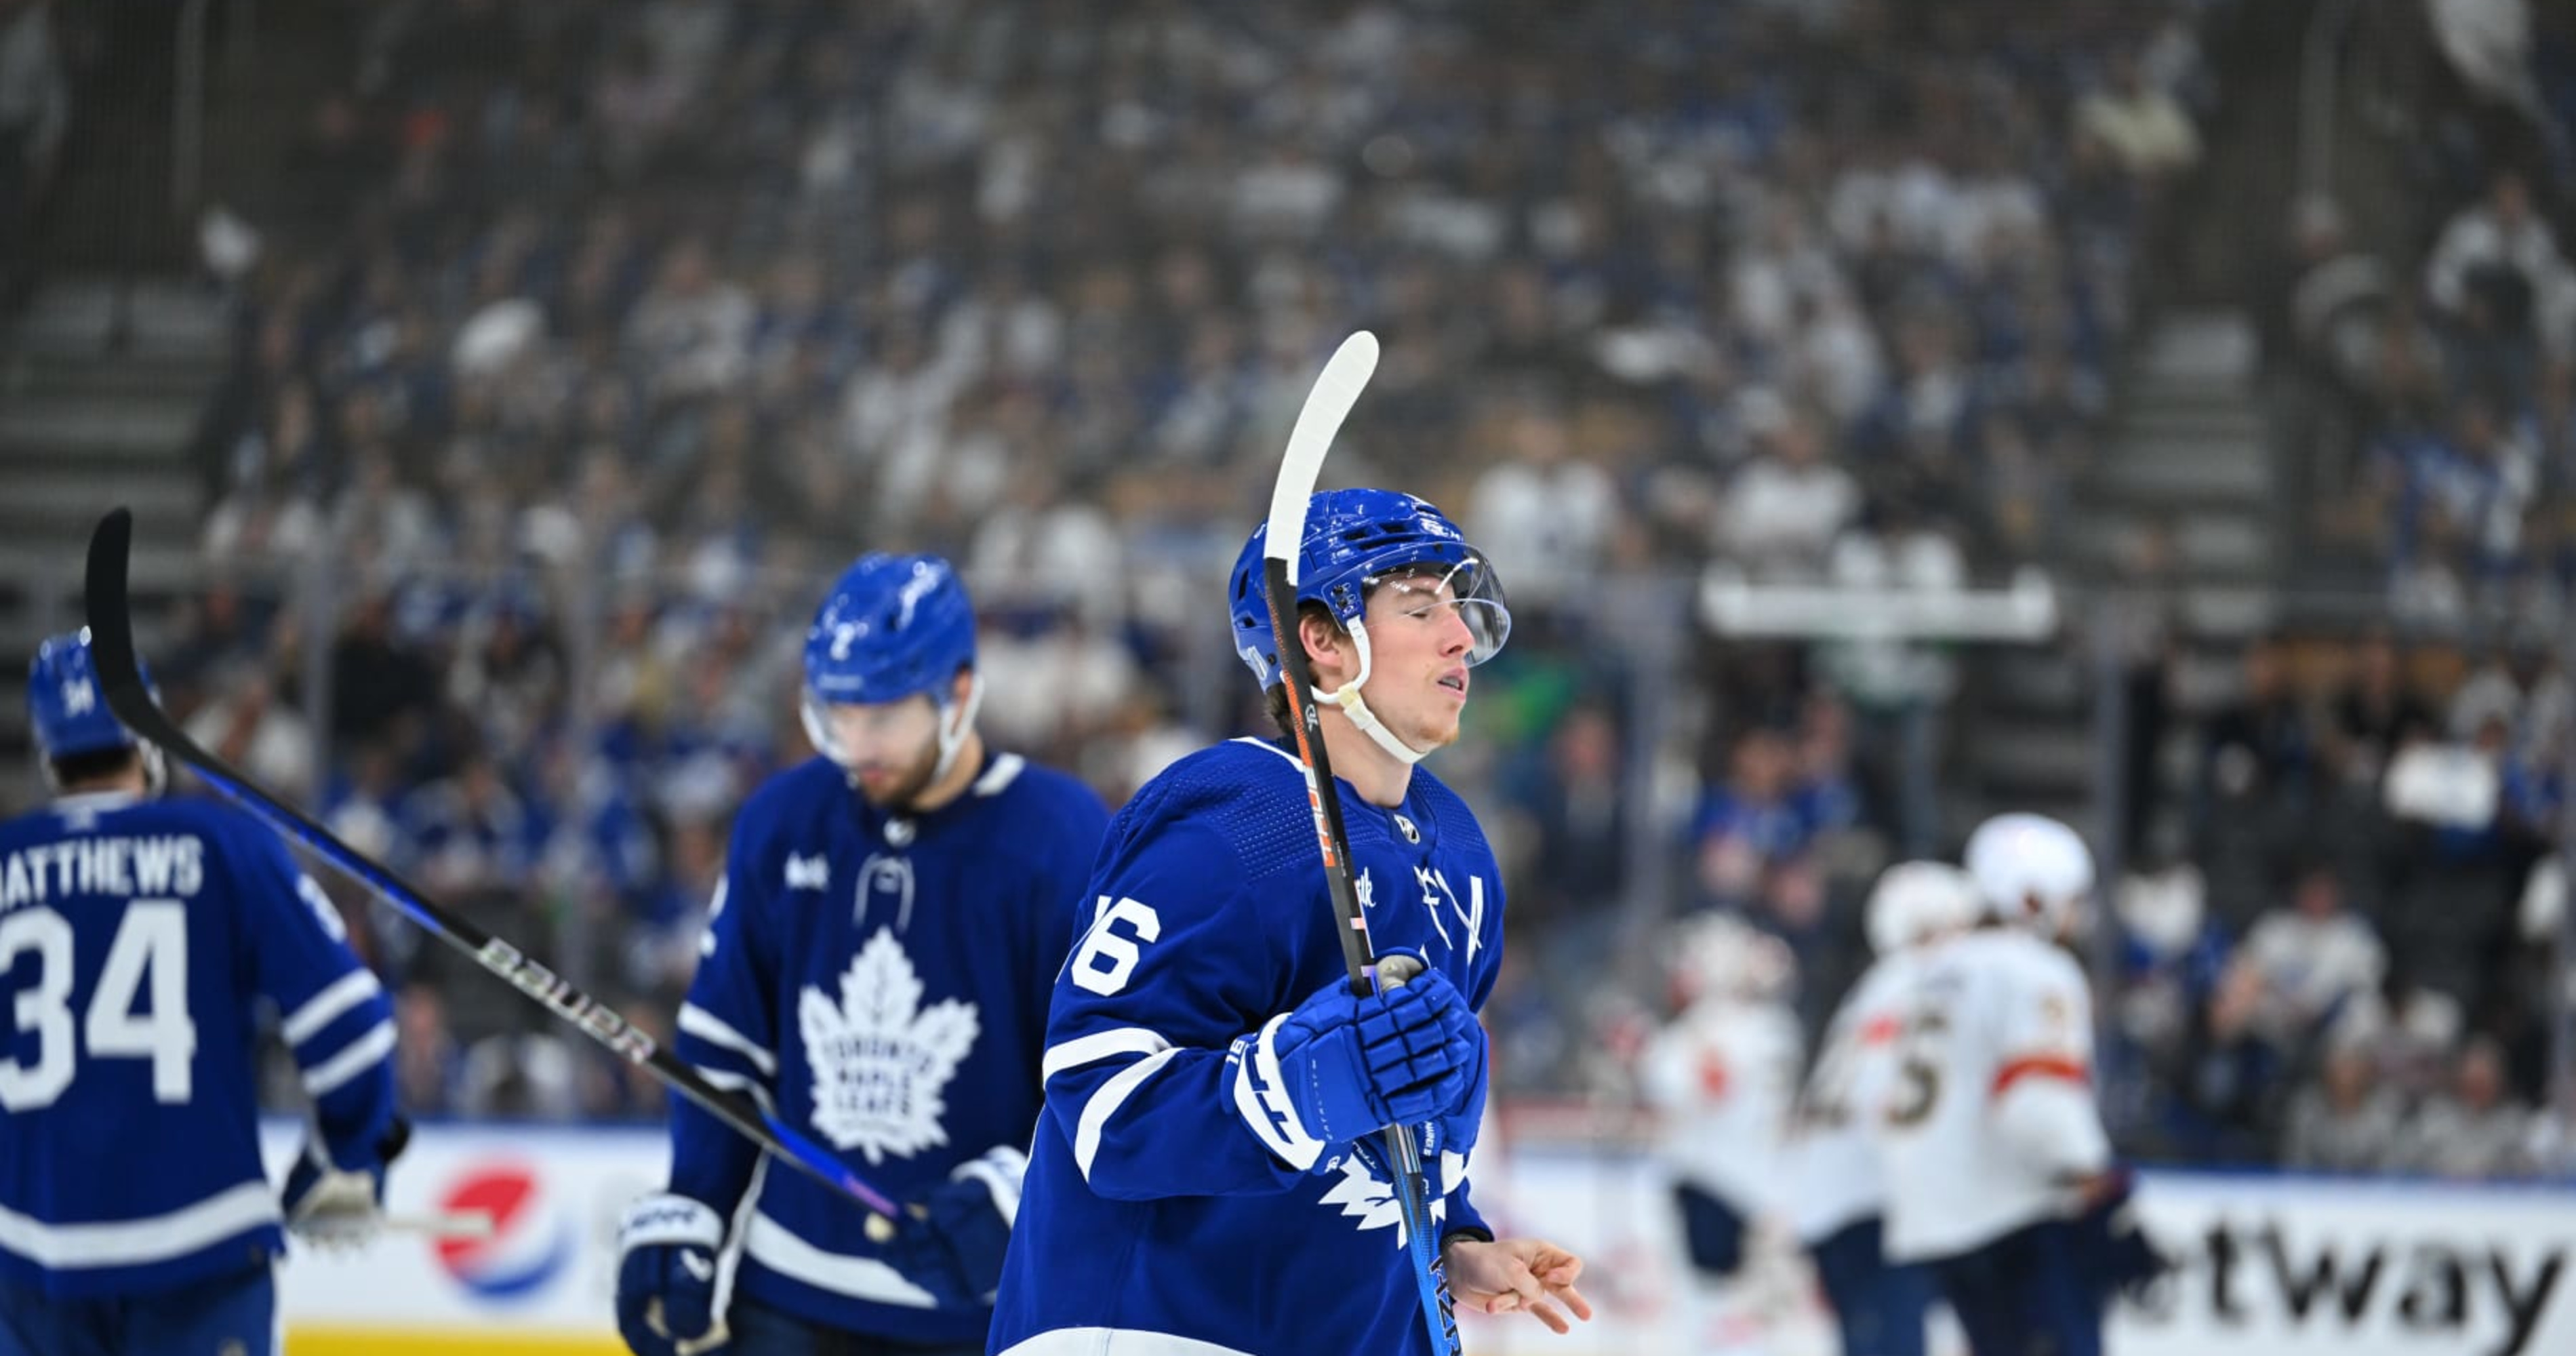 NHL Playoffs: The Toronto Maple Leafs got eliminated again. What